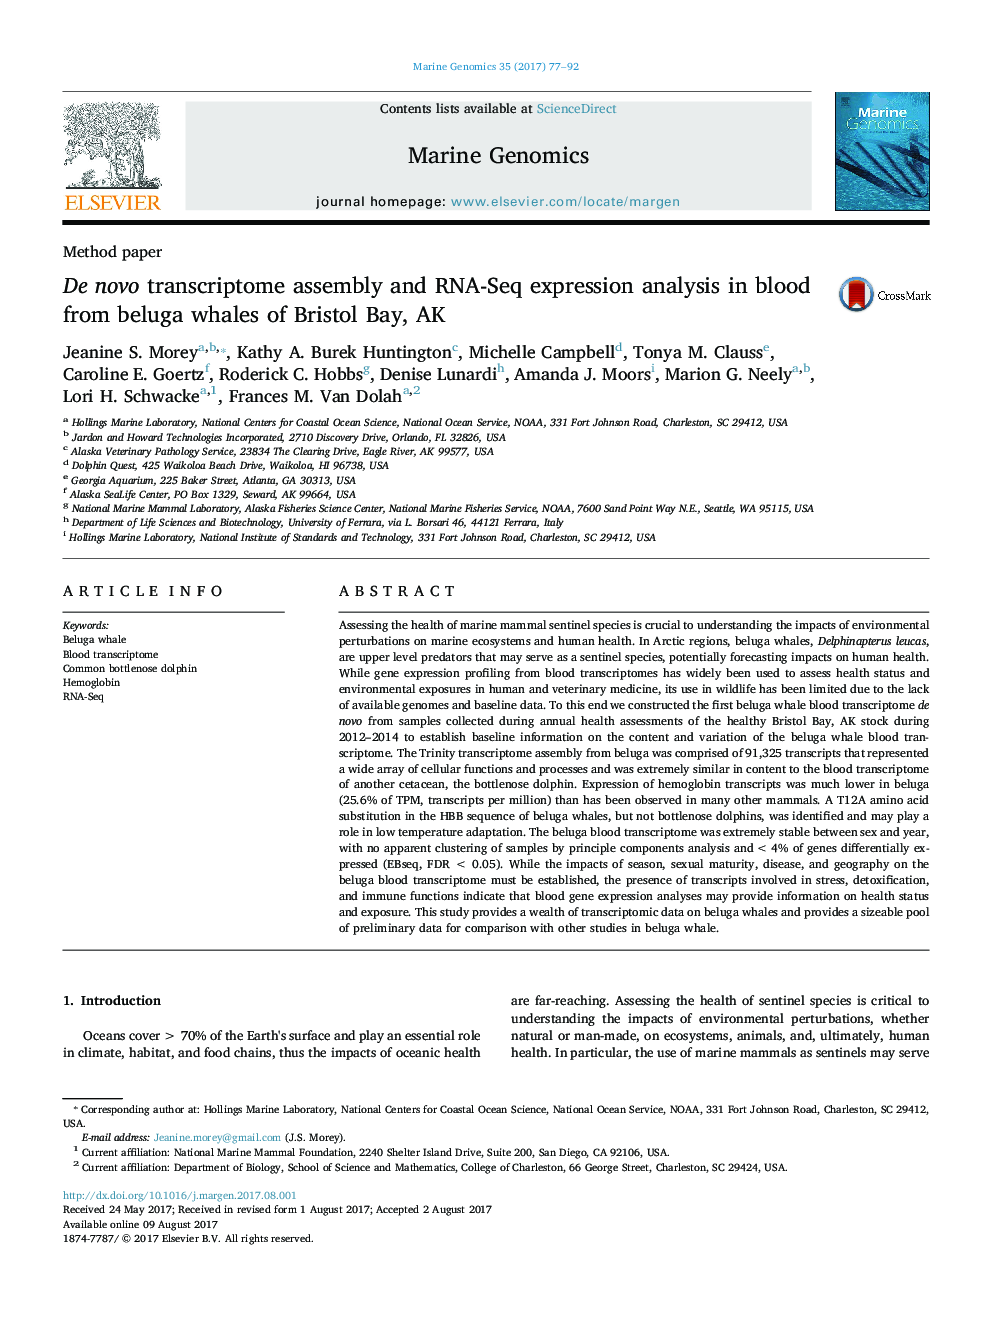 Method paperDe novo transcriptome assembly and RNA-Seq expression analysis in blood from beluga whales of Bristol Bay, AK